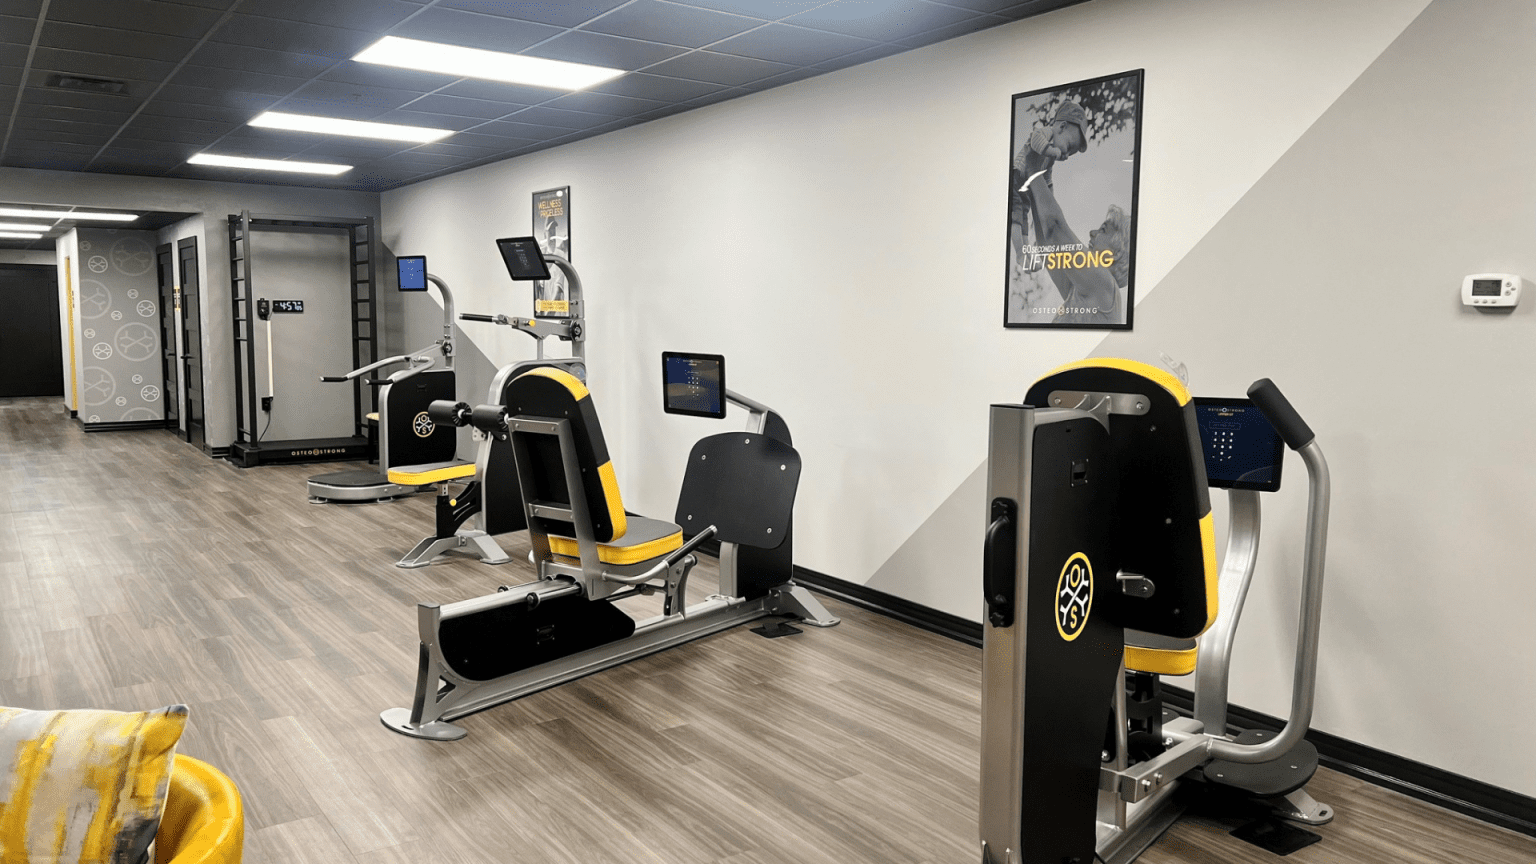 A spacious exercise area at OsteoStrong with various pieces of exercise equipment. The walls are decorated with motivational posters, and yellow chairs are arranged in a seating area.